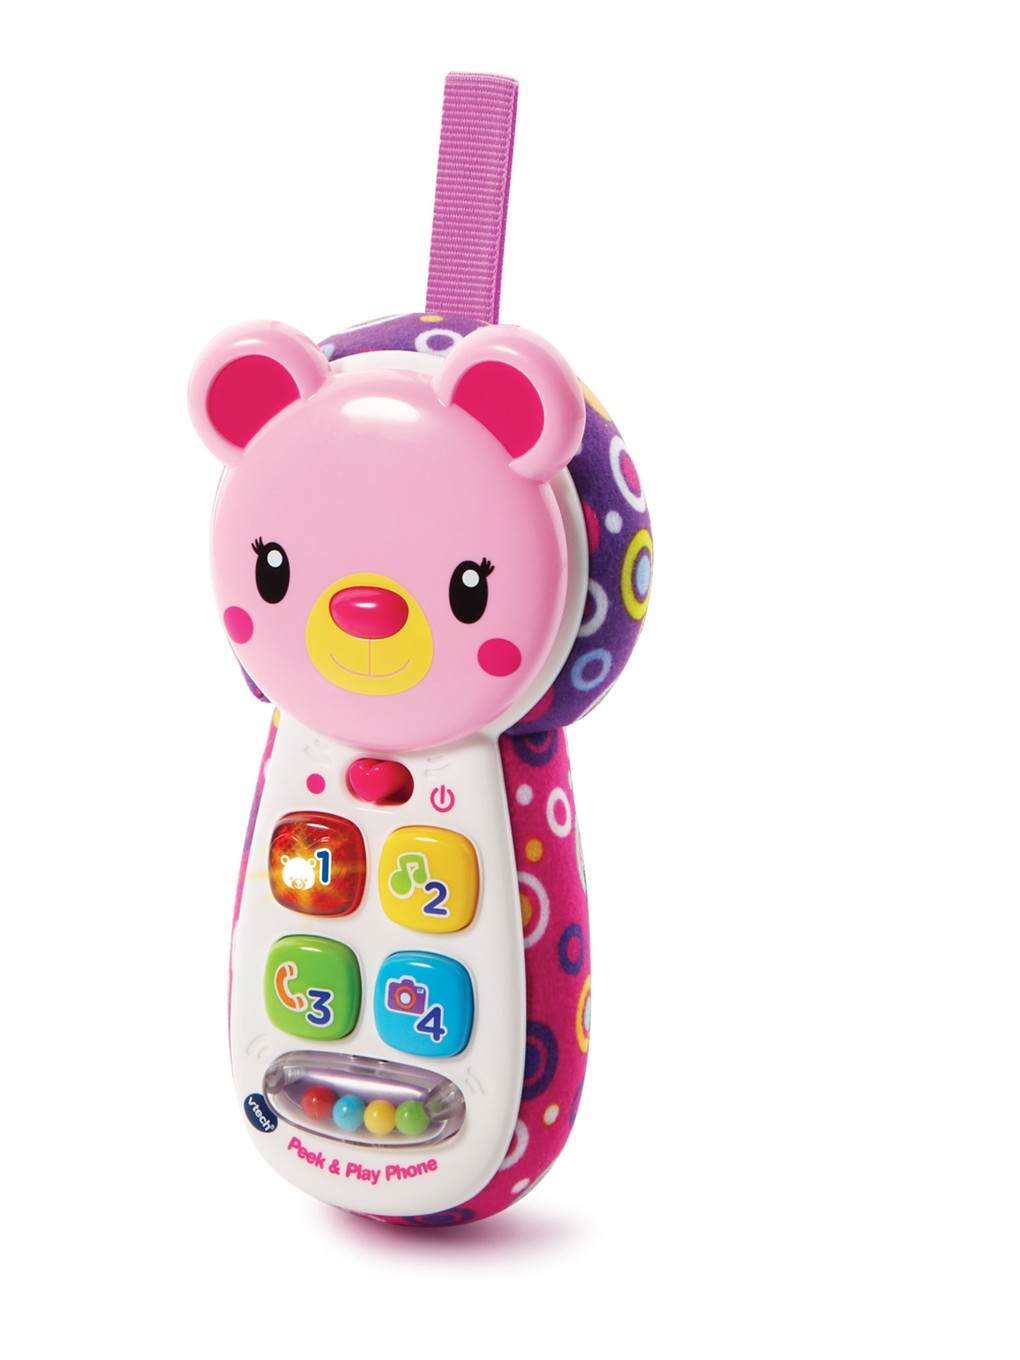 Brand New VTech Peek & Play Phone PINK Baby Toy Interactive 